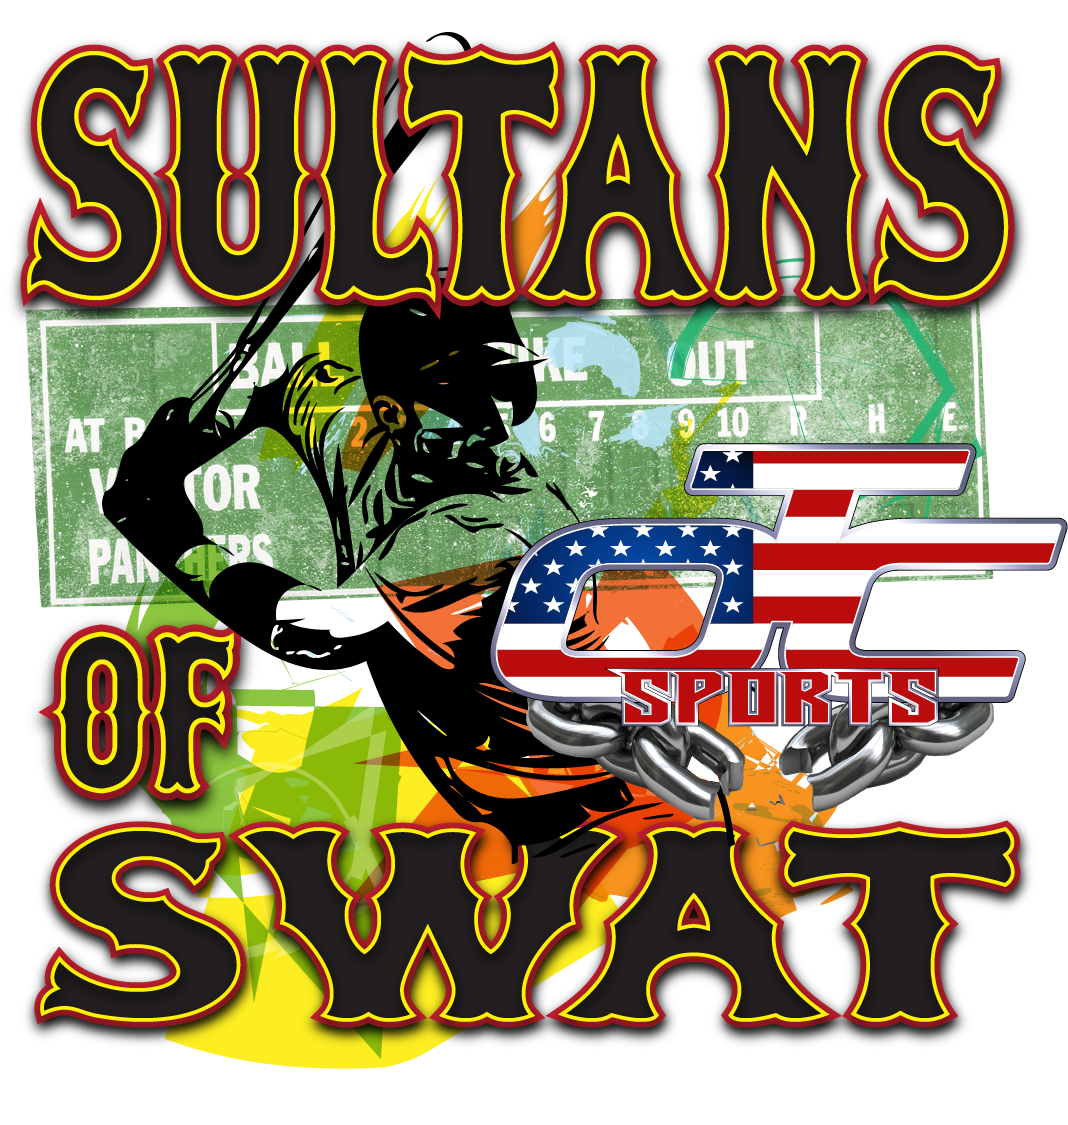 Sultans Of Swat! Logo